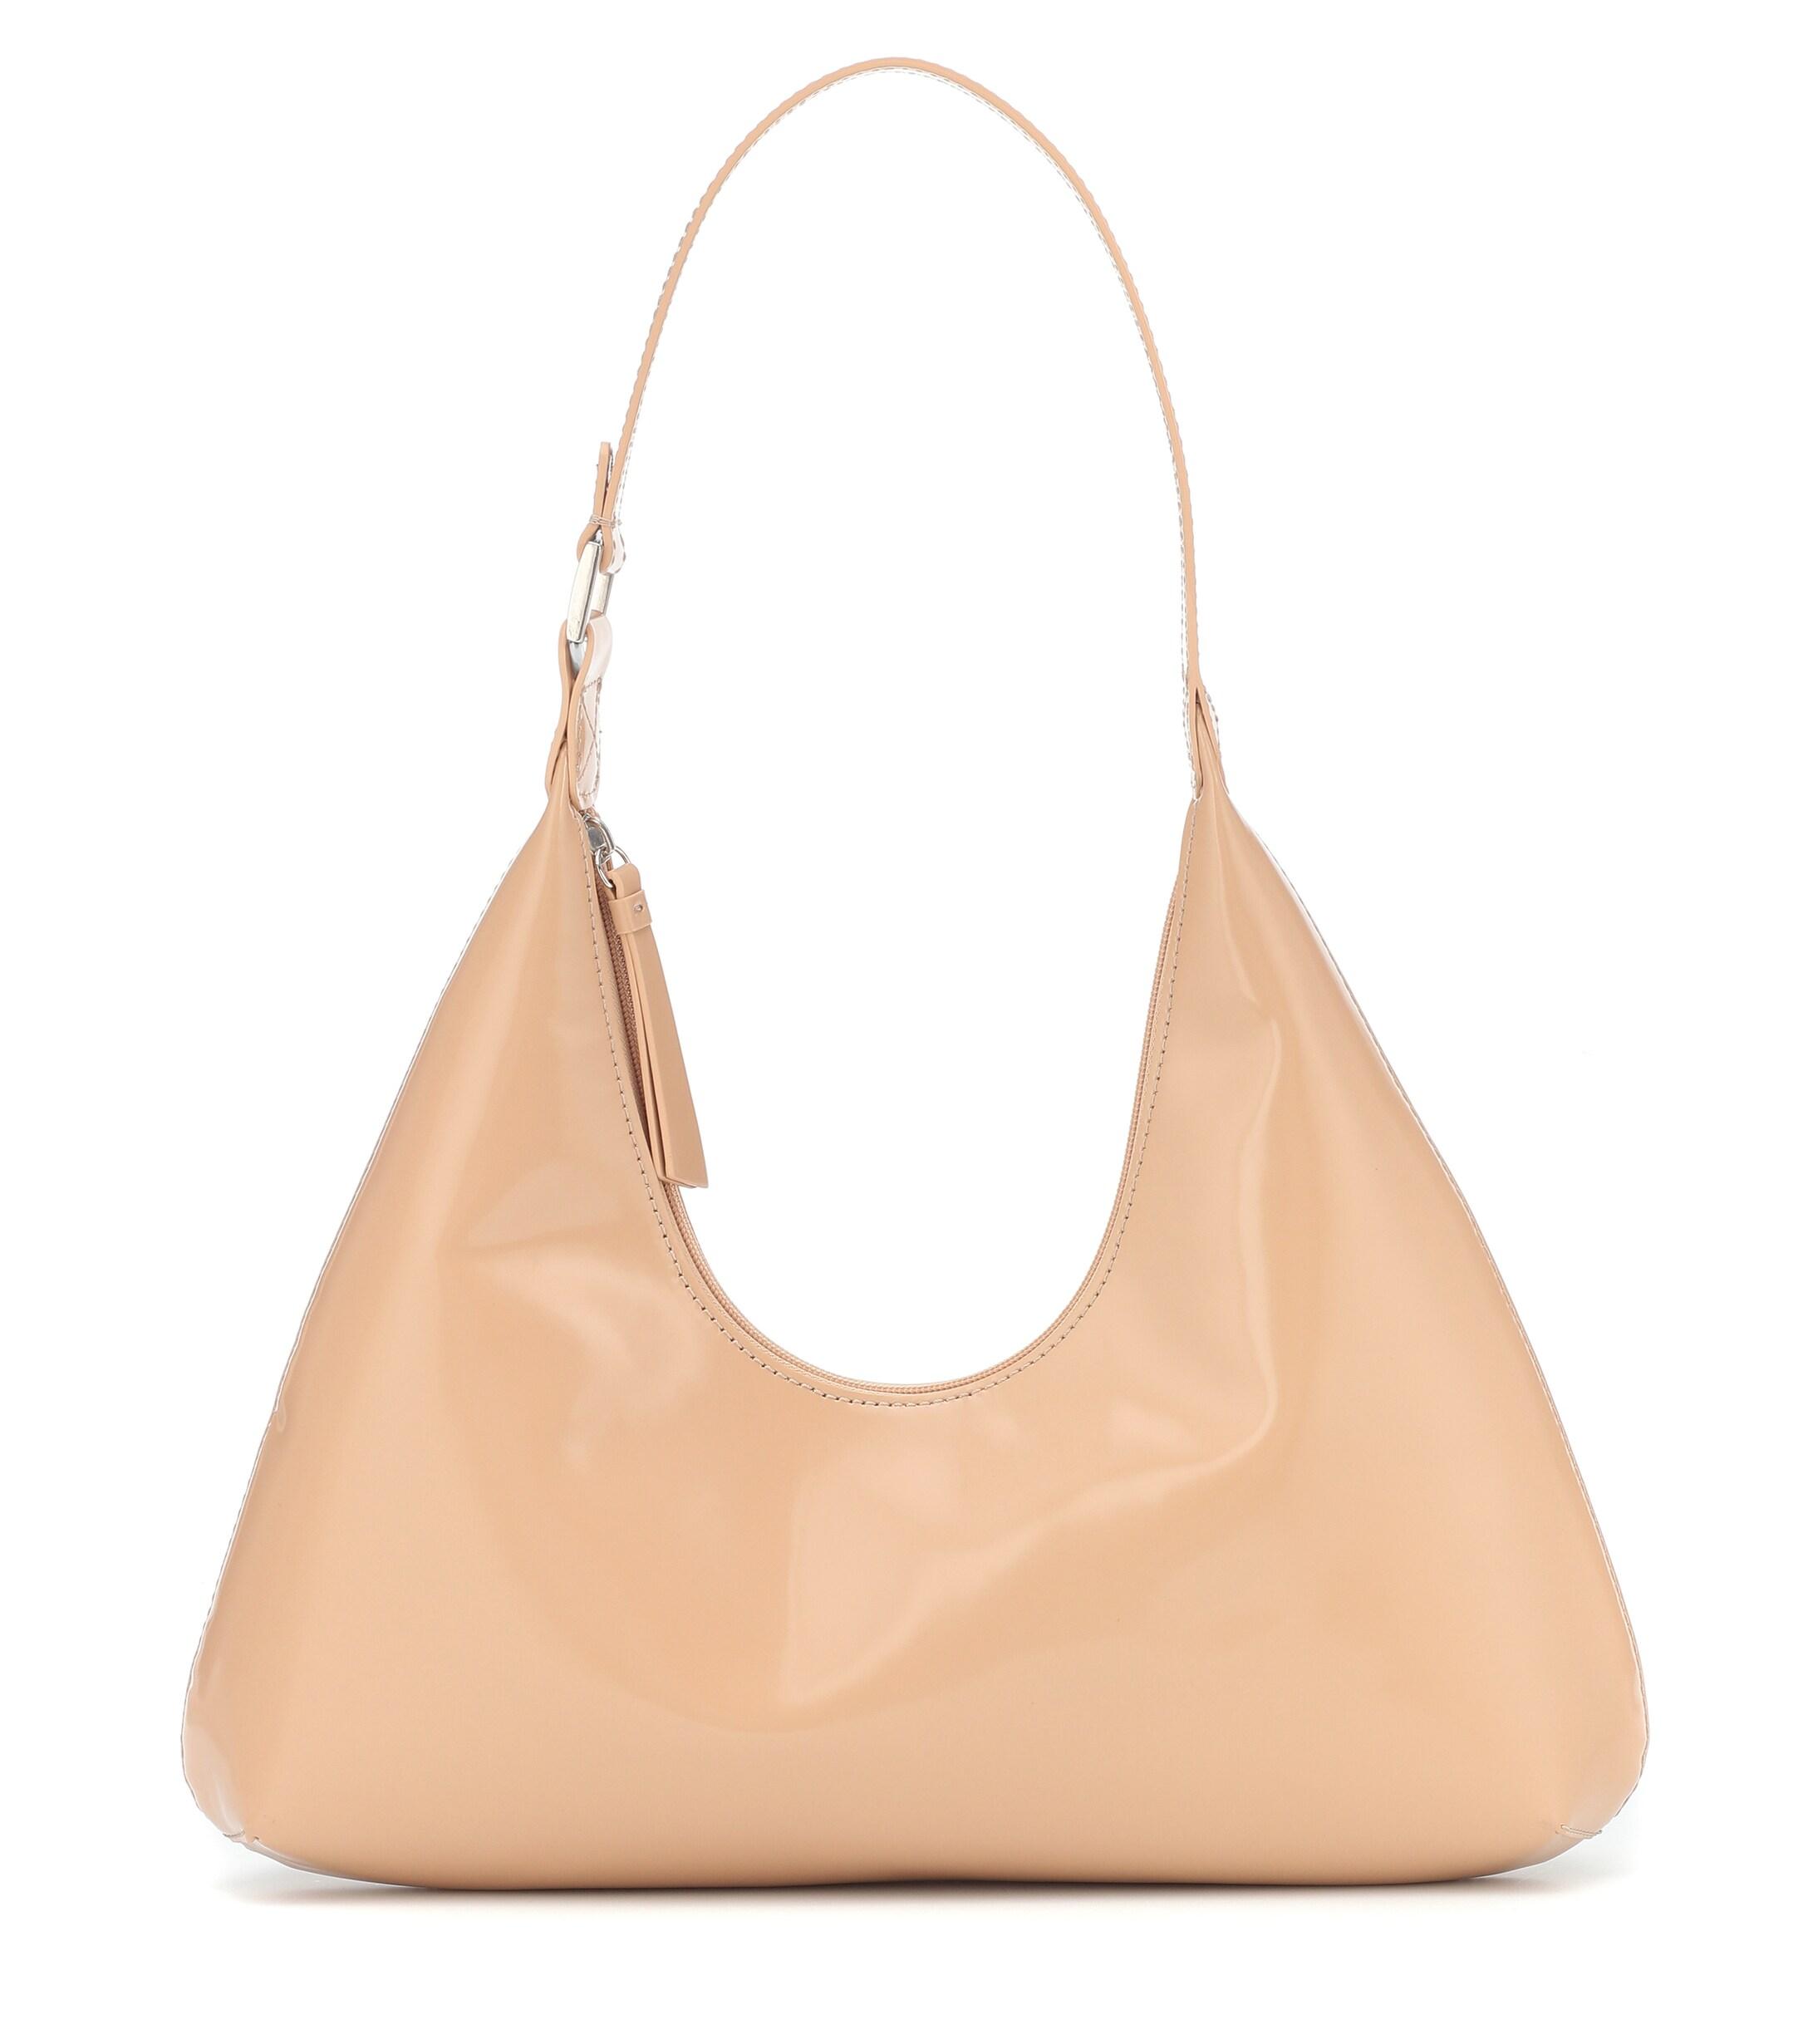 BY FAR Patent Leather Amber Shoulder Bag in Beige (White) - Save 